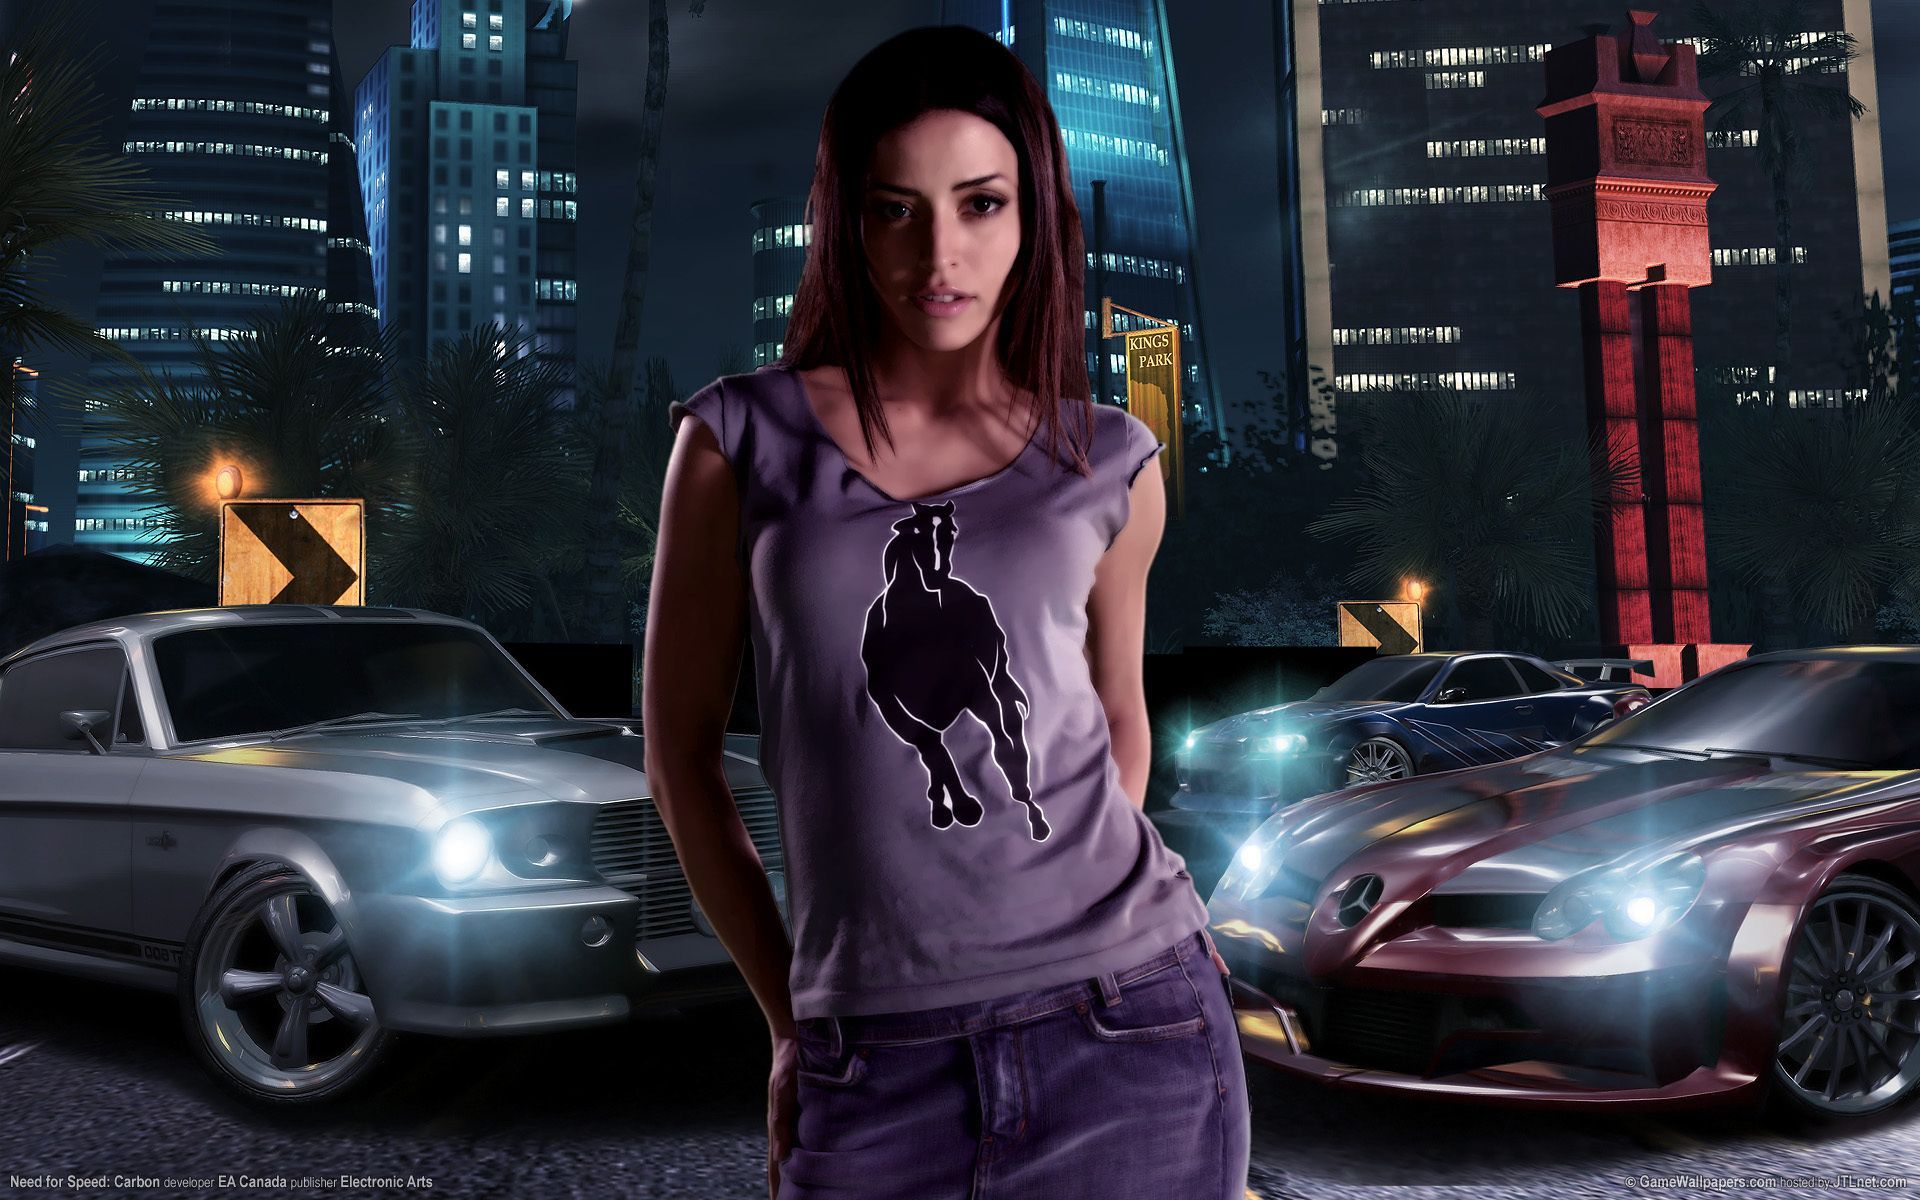 Need For Speed Carbon Wallpaper. Need for speed carbon, Need for speed, Need for speed movie